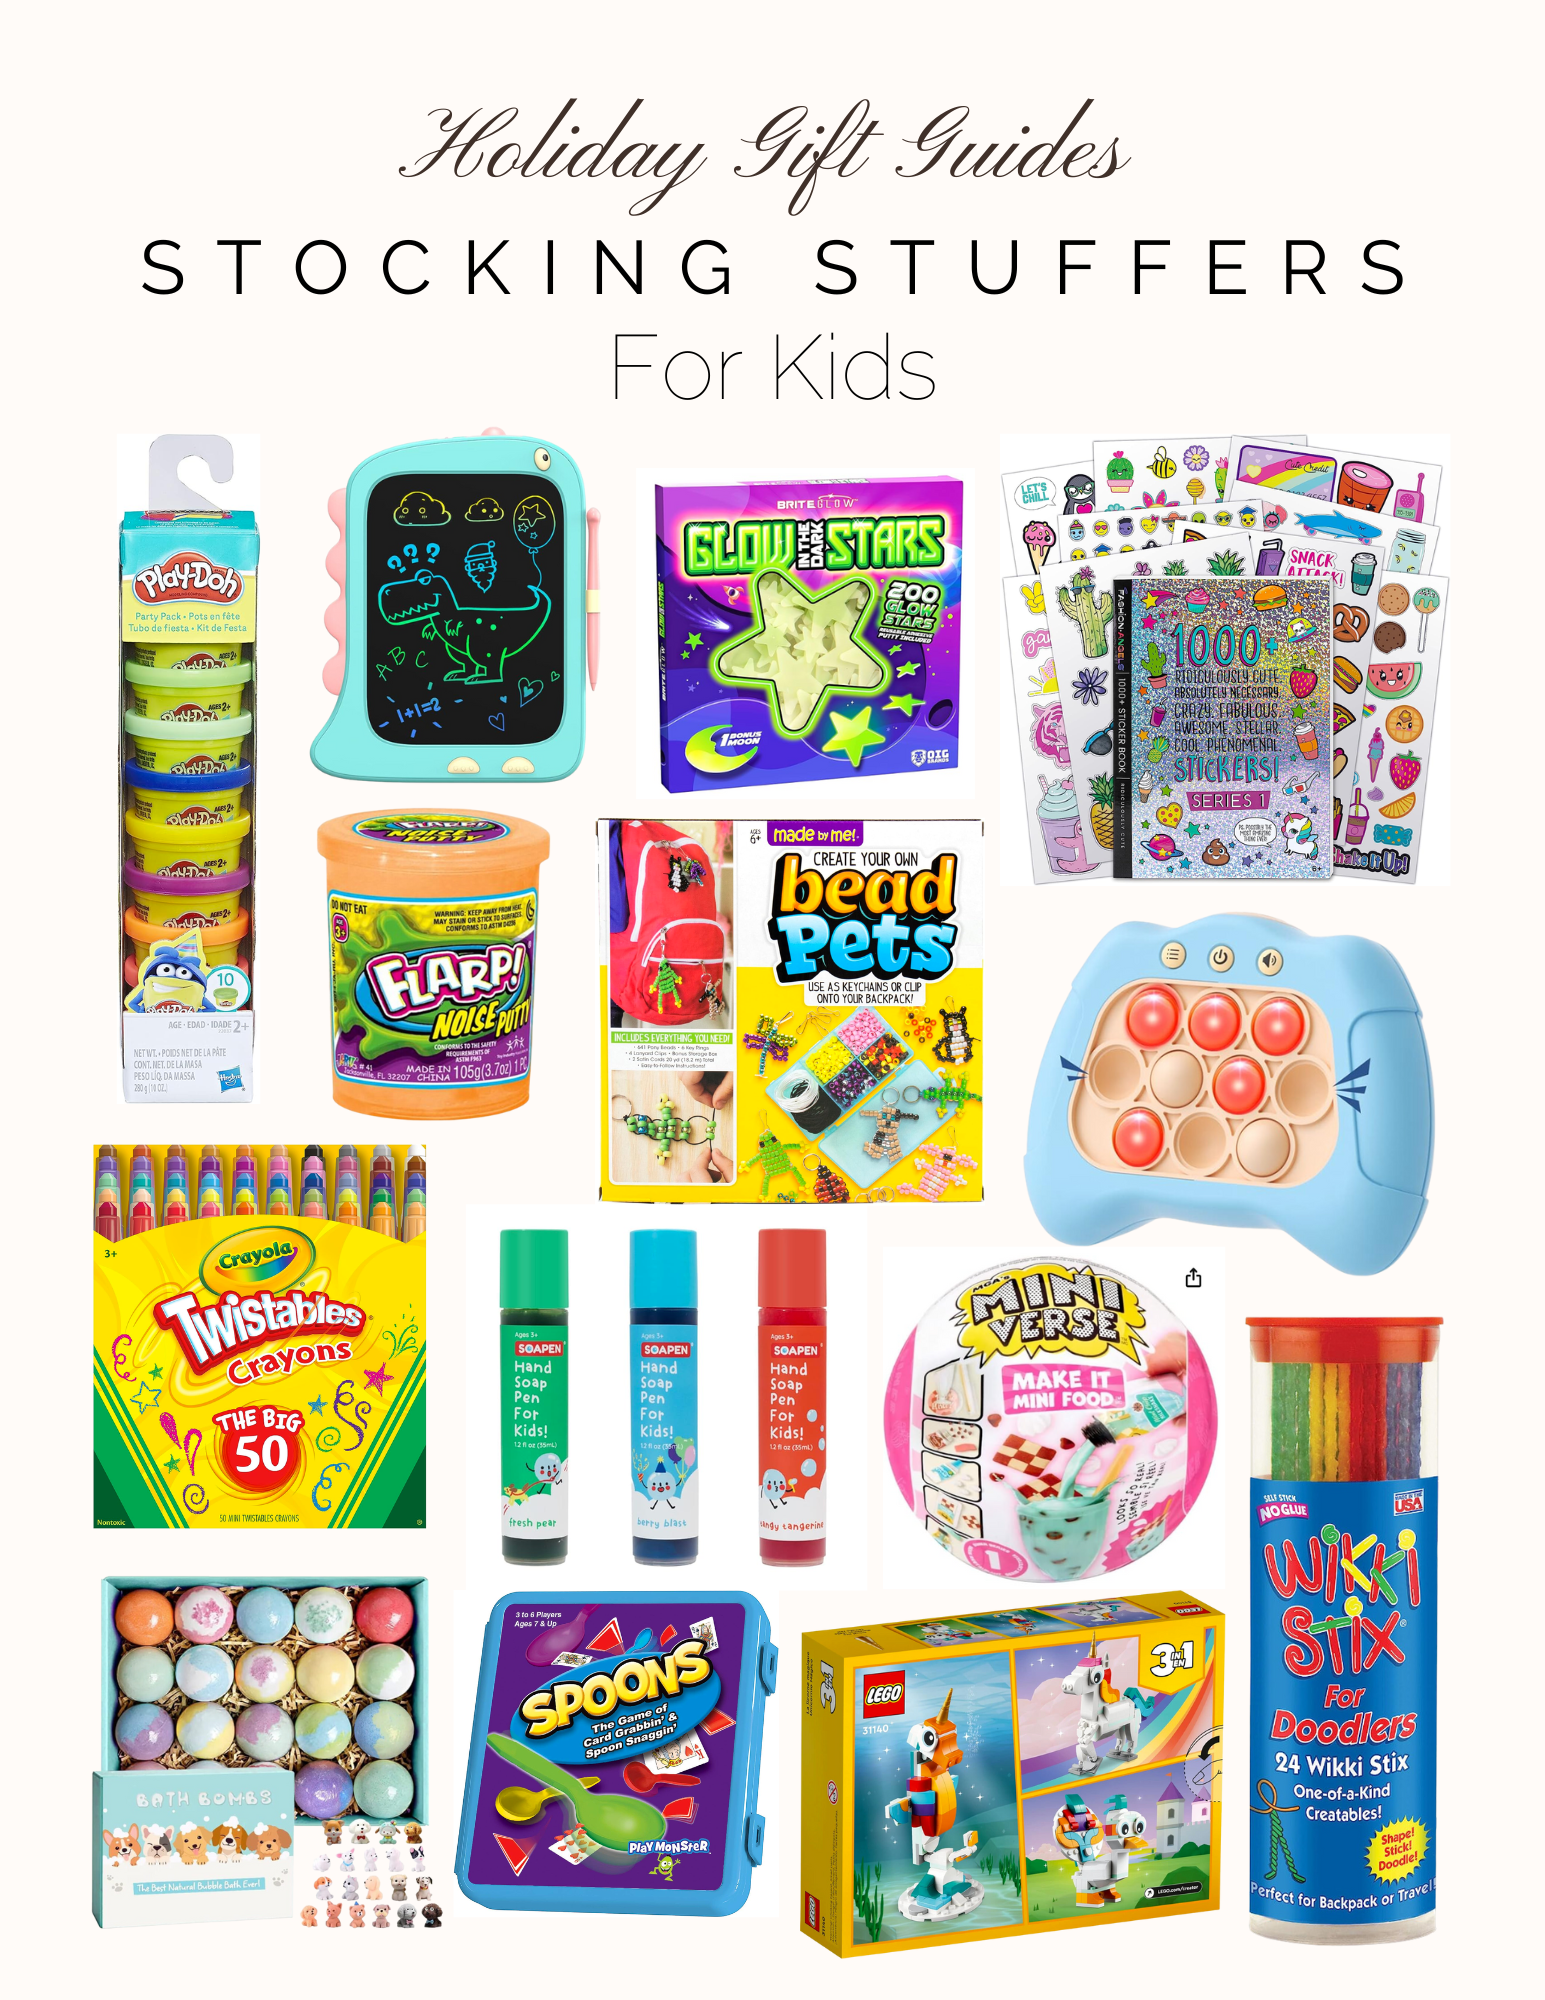 Stocking Stuffers for Everyone - For Her, For Him, For Kids & For